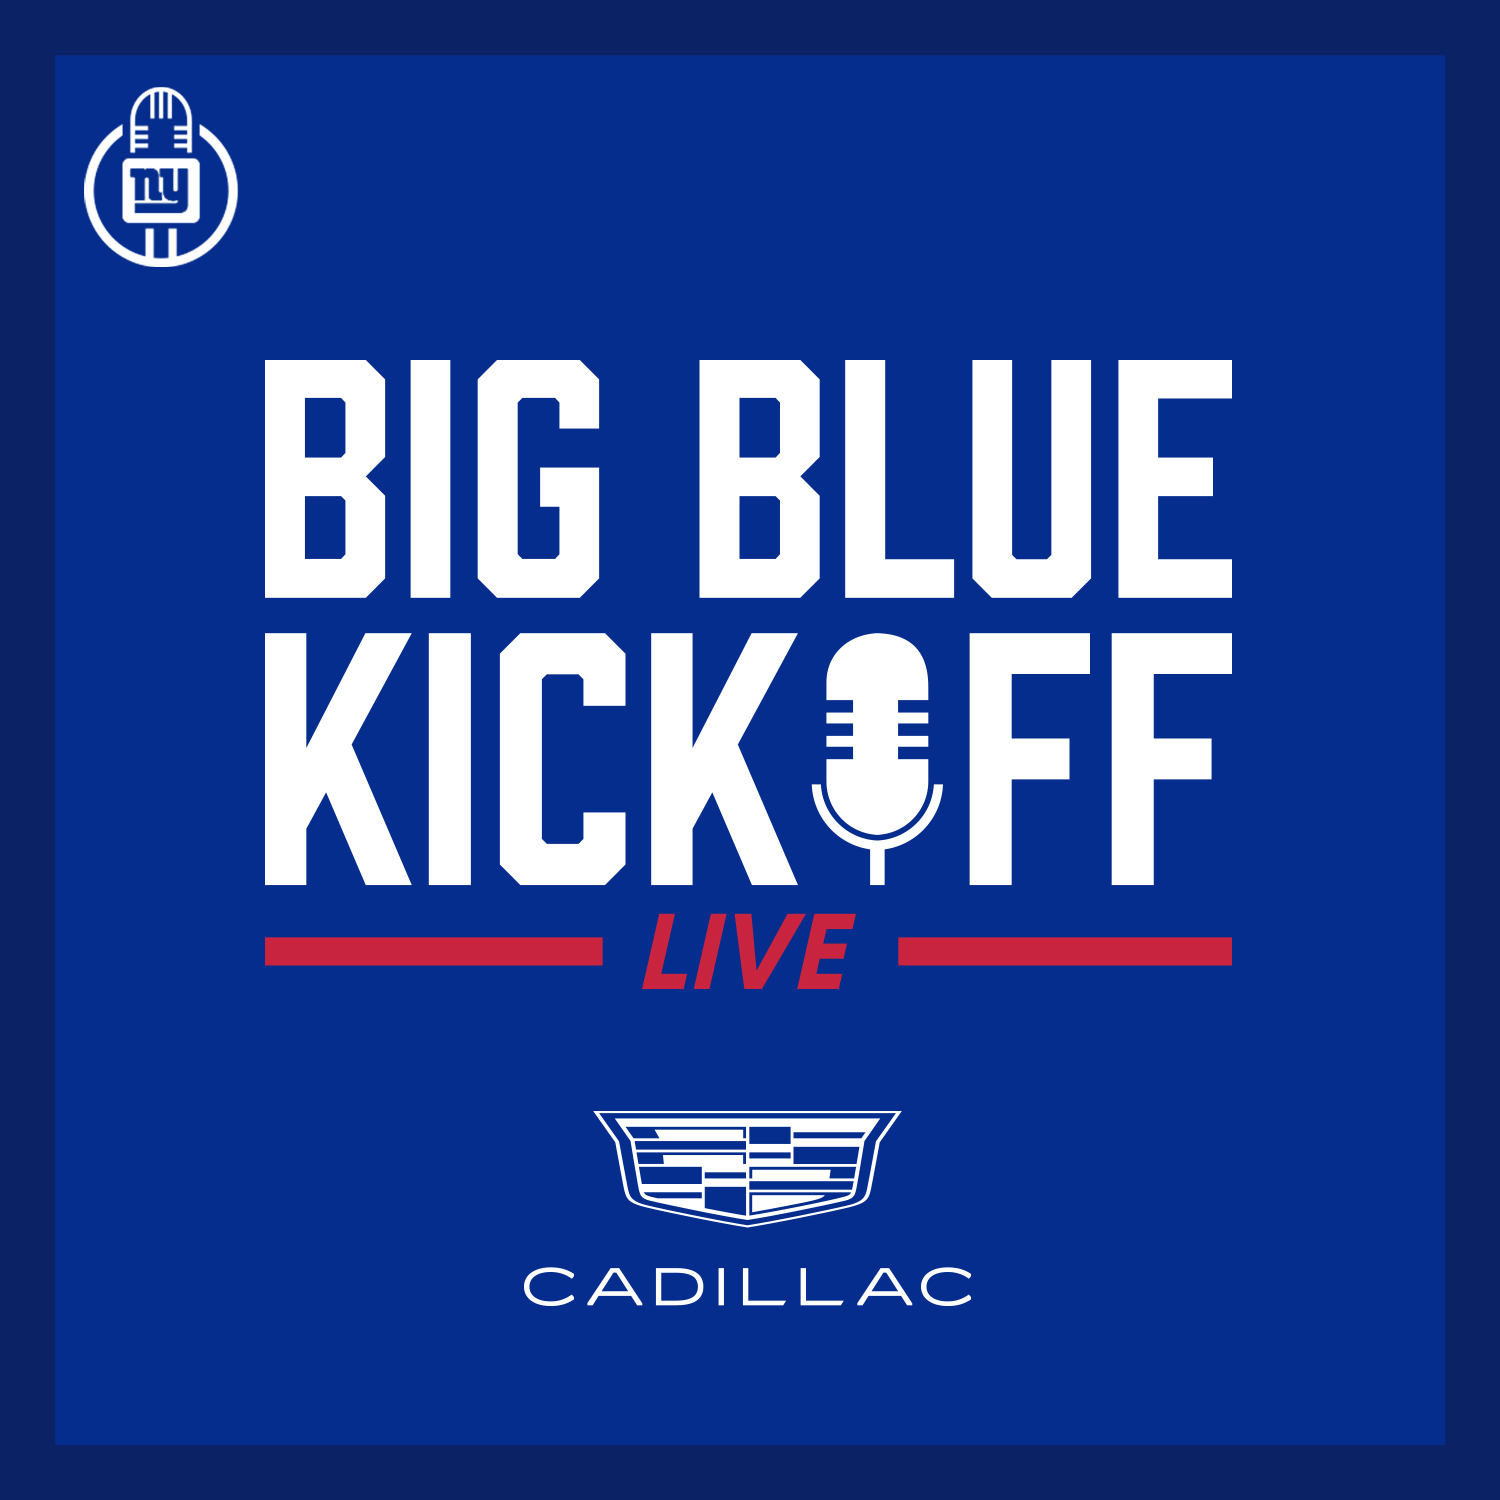 Big Blue Kickoff Live 5/11 | Looking at 2022 opponents